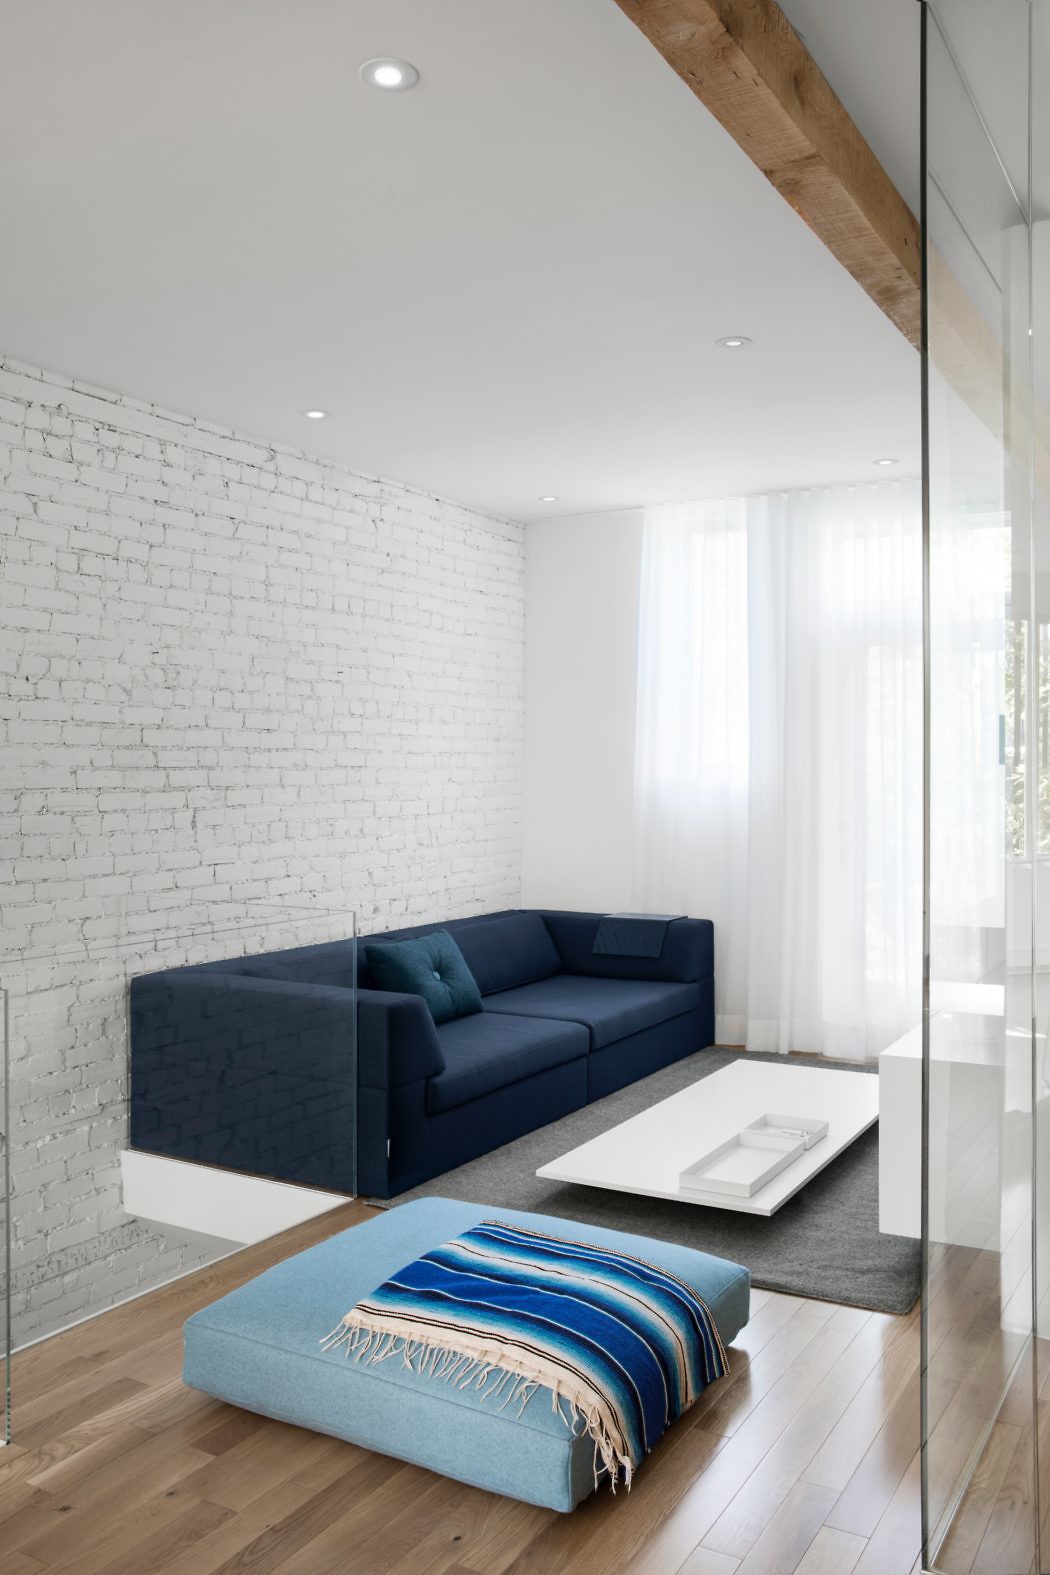 Minimalist living room with a blue sofa, white brick wall, and wooden beams